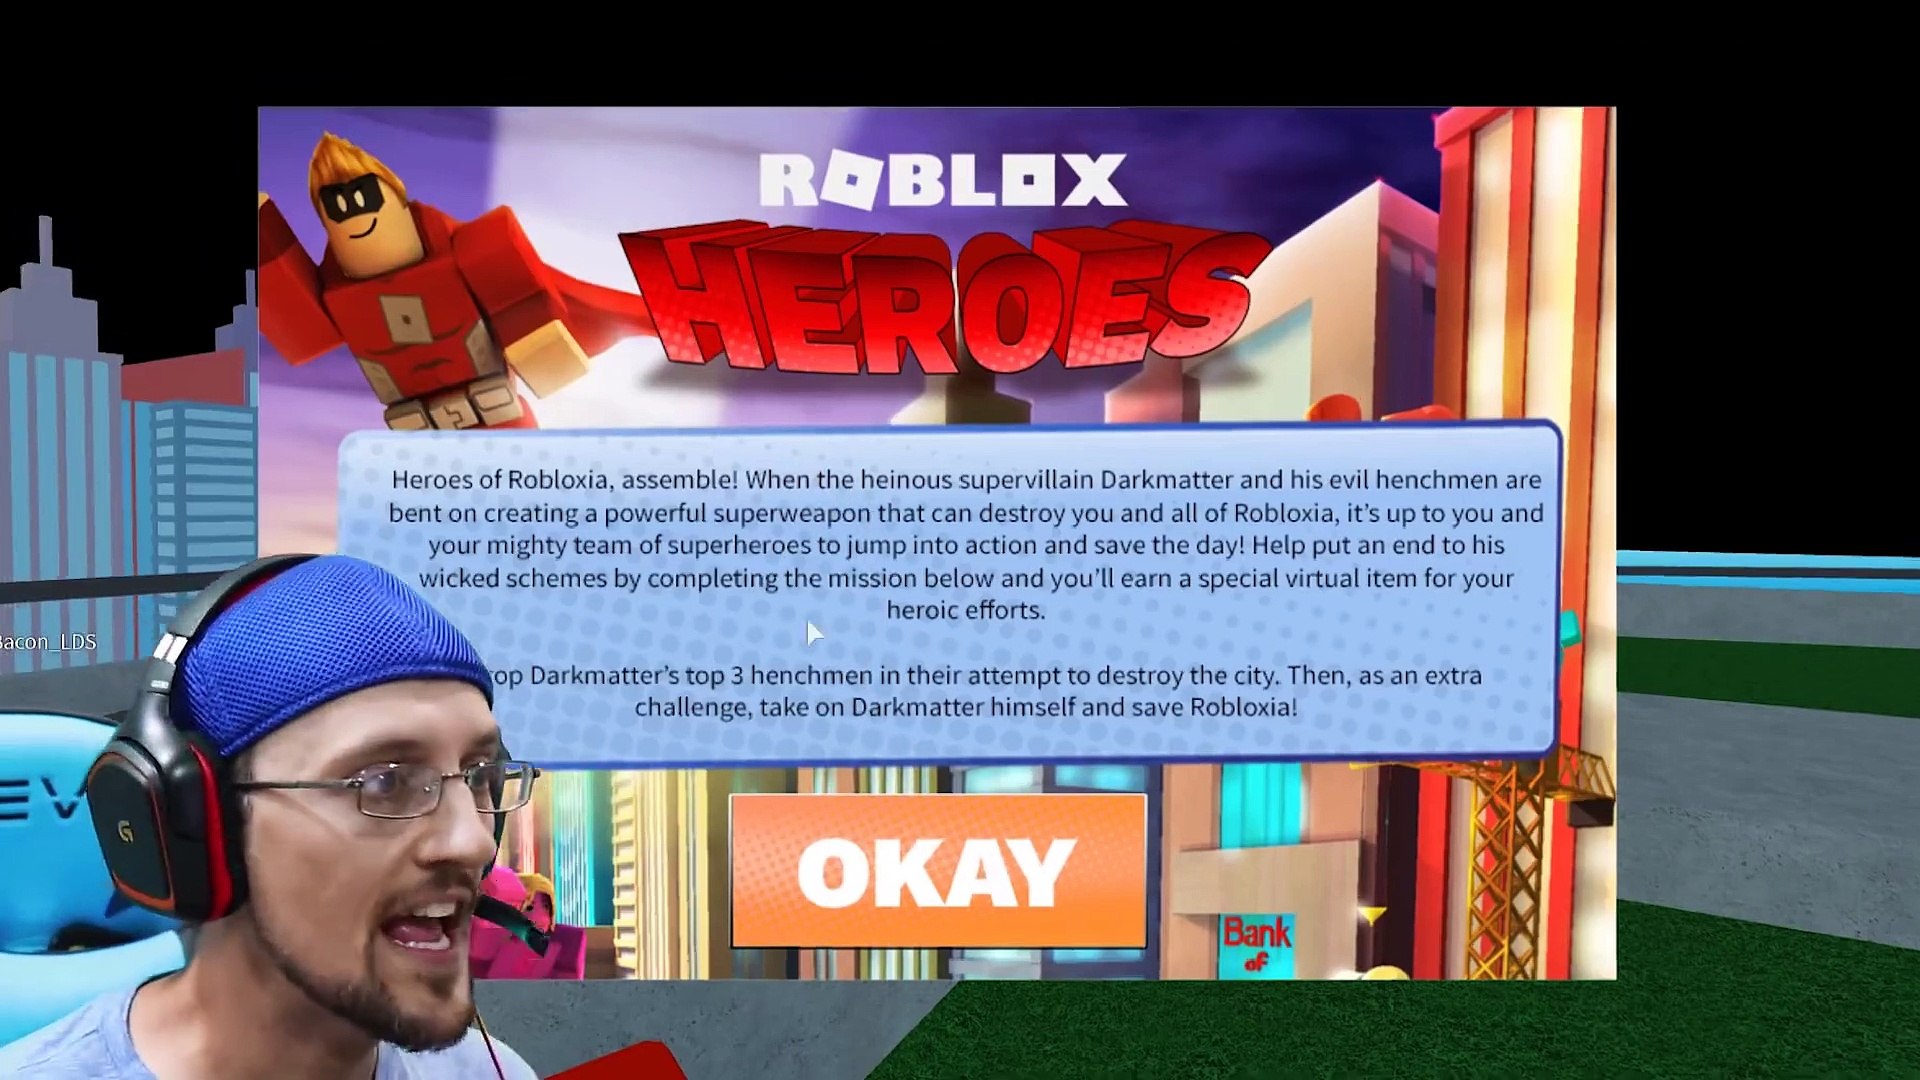 Let's Play with FGTeeV Dabbing Minion & Roblox Heroes of Robloxia